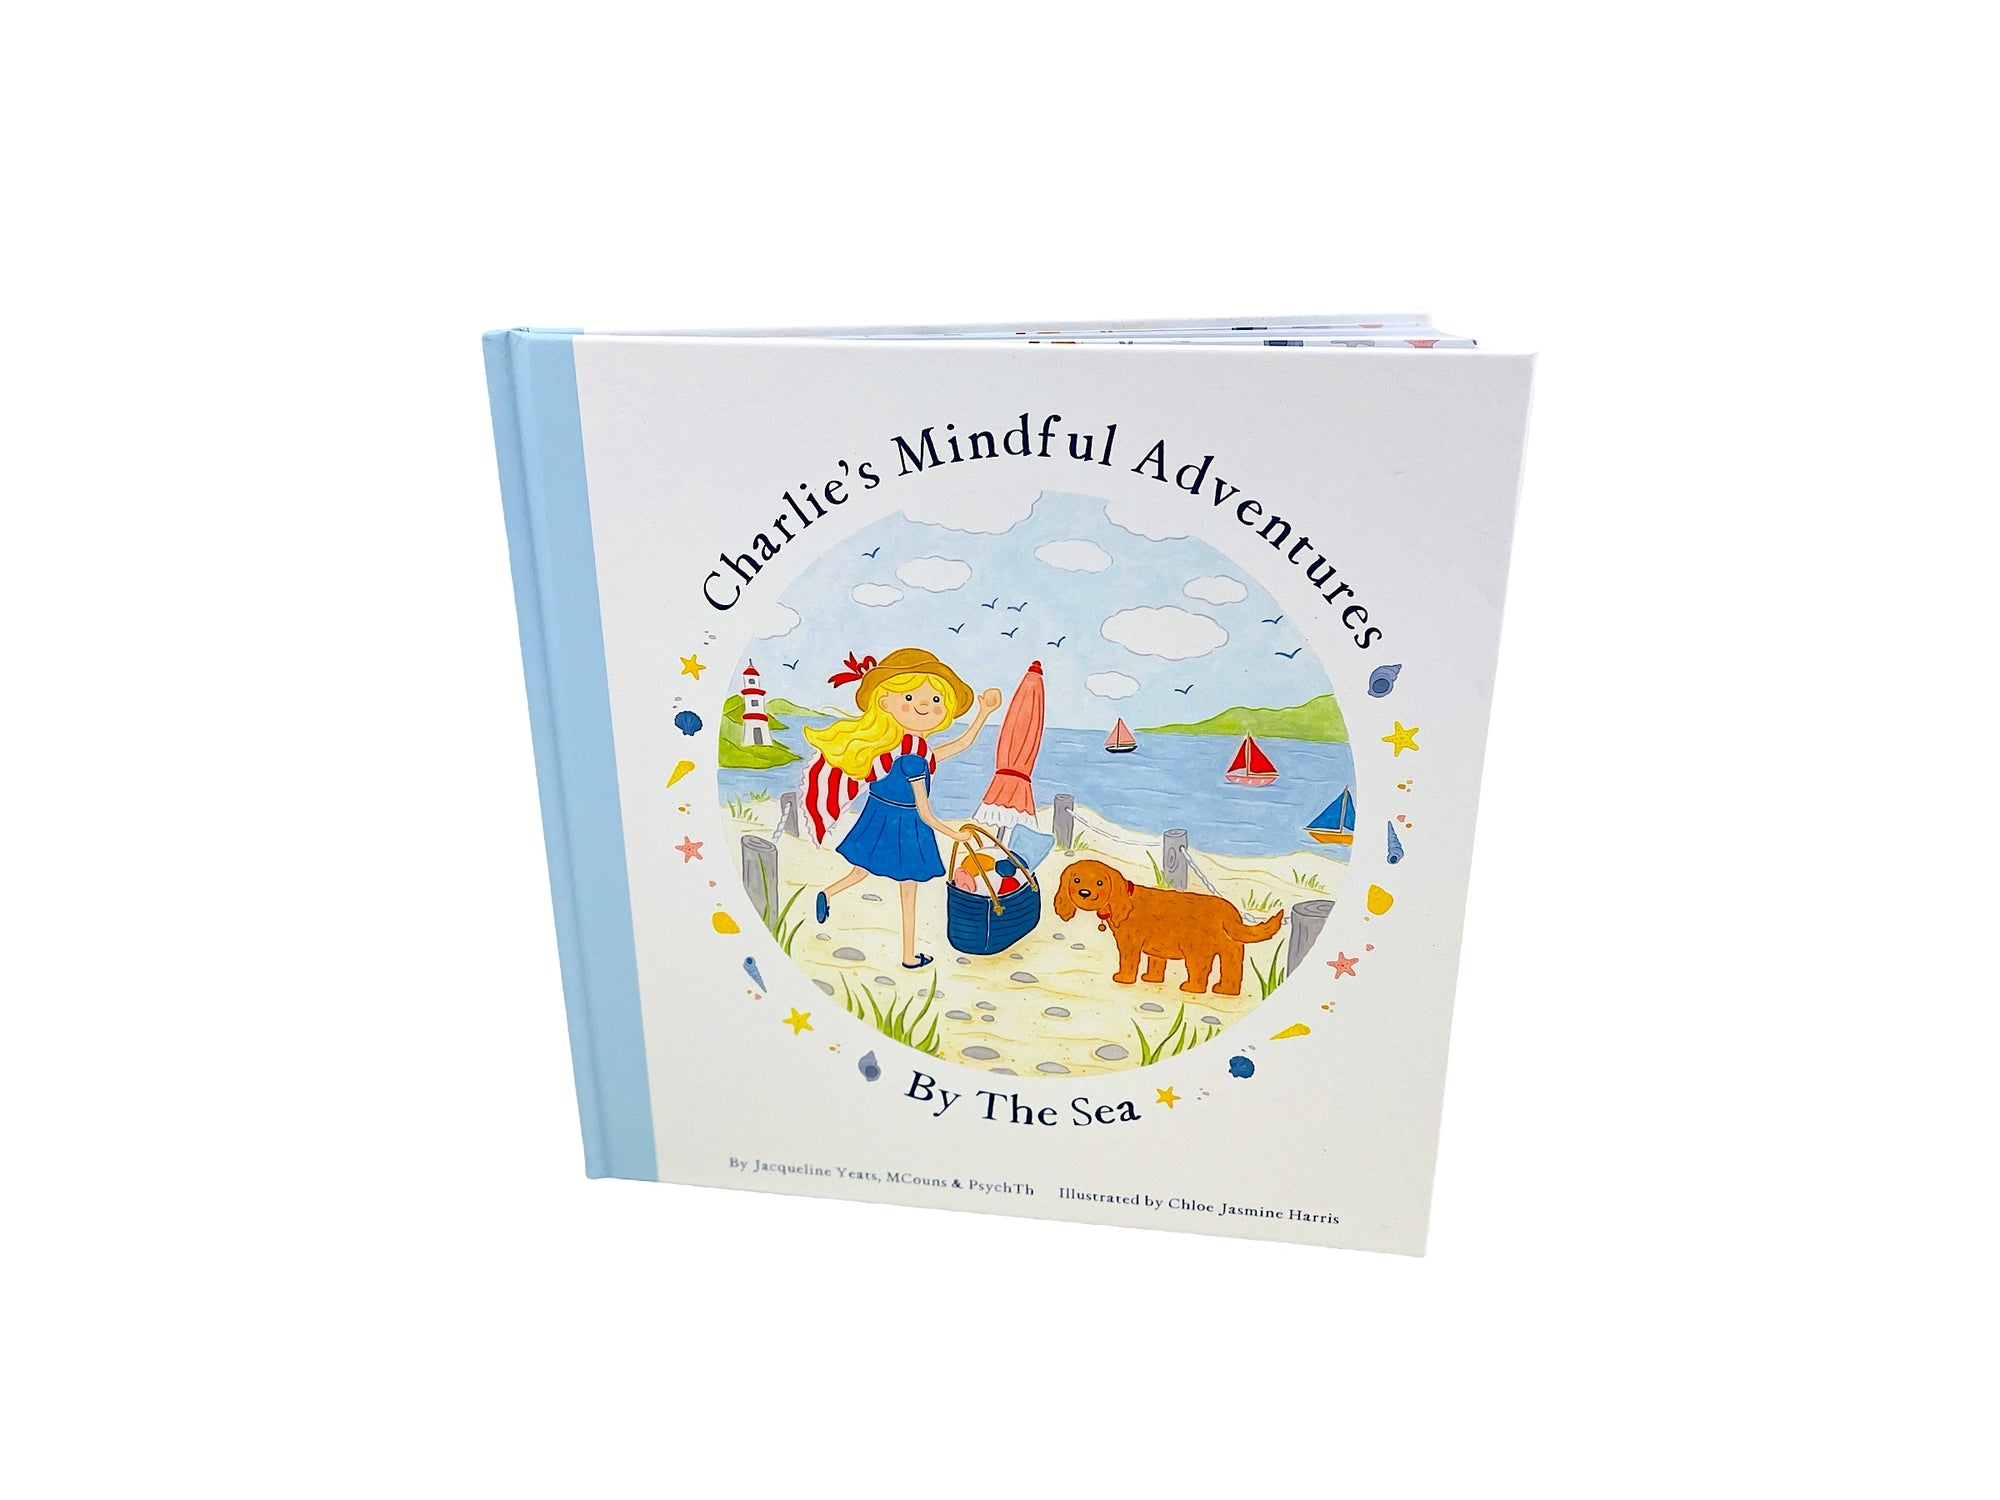 Mindful & Co Charlie's Mindful Adventures Book